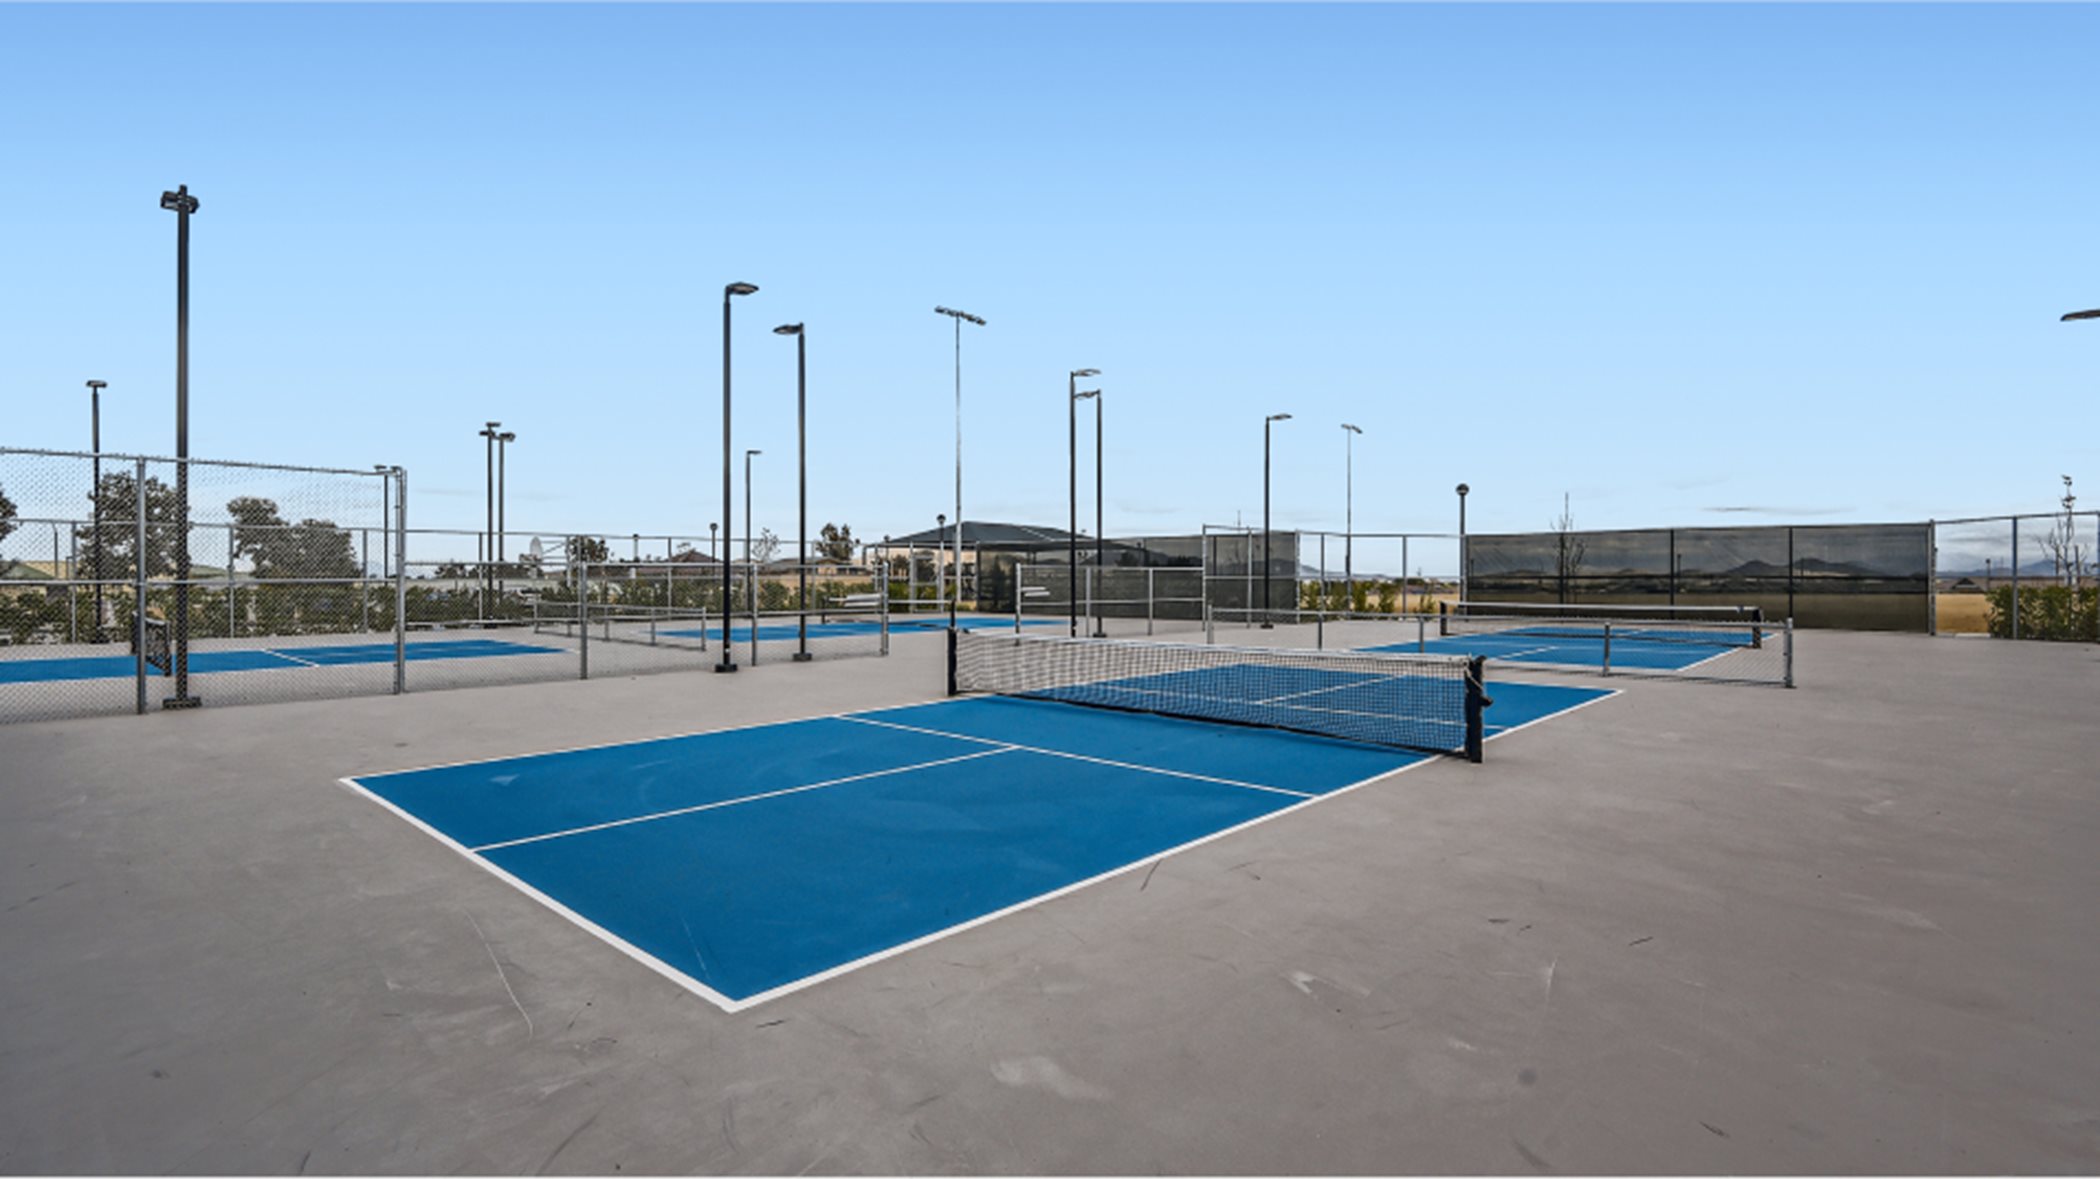 Blue tennis courts on a sunny day